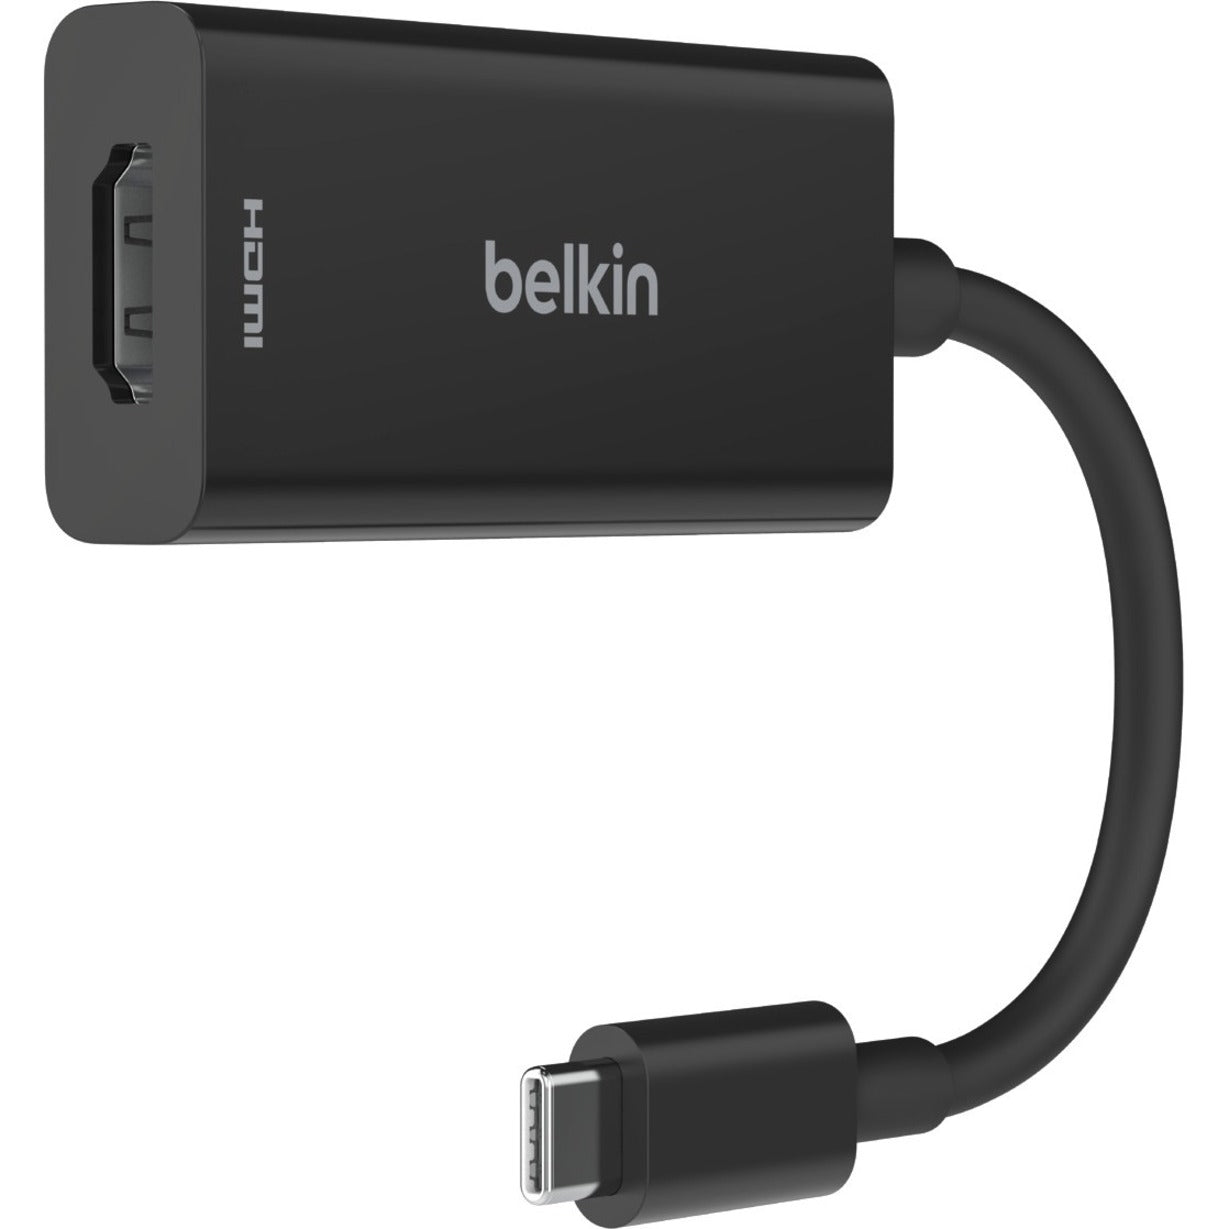 Belkin AVC013BTBK Connect USB-C to HDMI 2.1 Adapter Plug and Play 7680 x 4320 Resolution Support